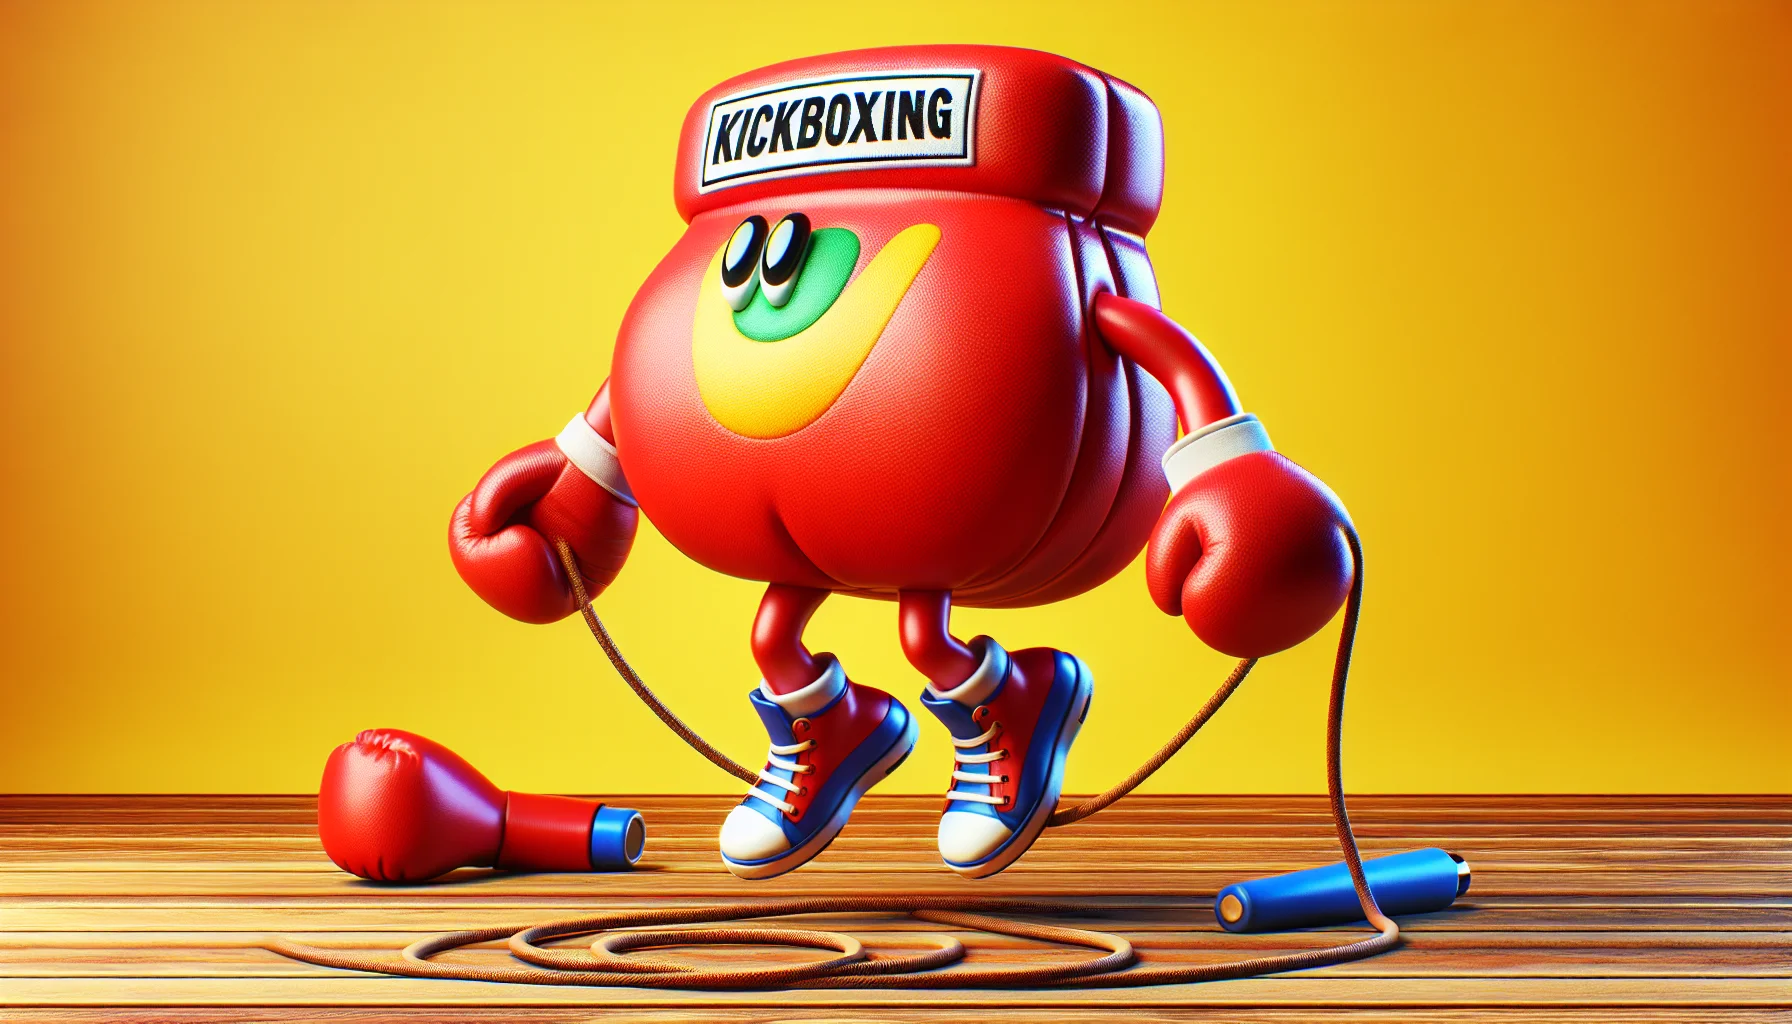 Generate an image showcasing a humorous scene using a kickboxing logo. The logo is positioned comically, maybe wearing a pair of oversize boxing gloves that are clumsily heavy and exaggeratedly large. It's trying to jump rope, but the gloves are making it difficult, causing everyone to chuckle. This scene inspires curiosity and laughter, and simultaneously motivates people to take up kickboxing and engage in physical activities. Use bright, energetic colors to enhance the overall appeal and create a cheerful atmosphere.